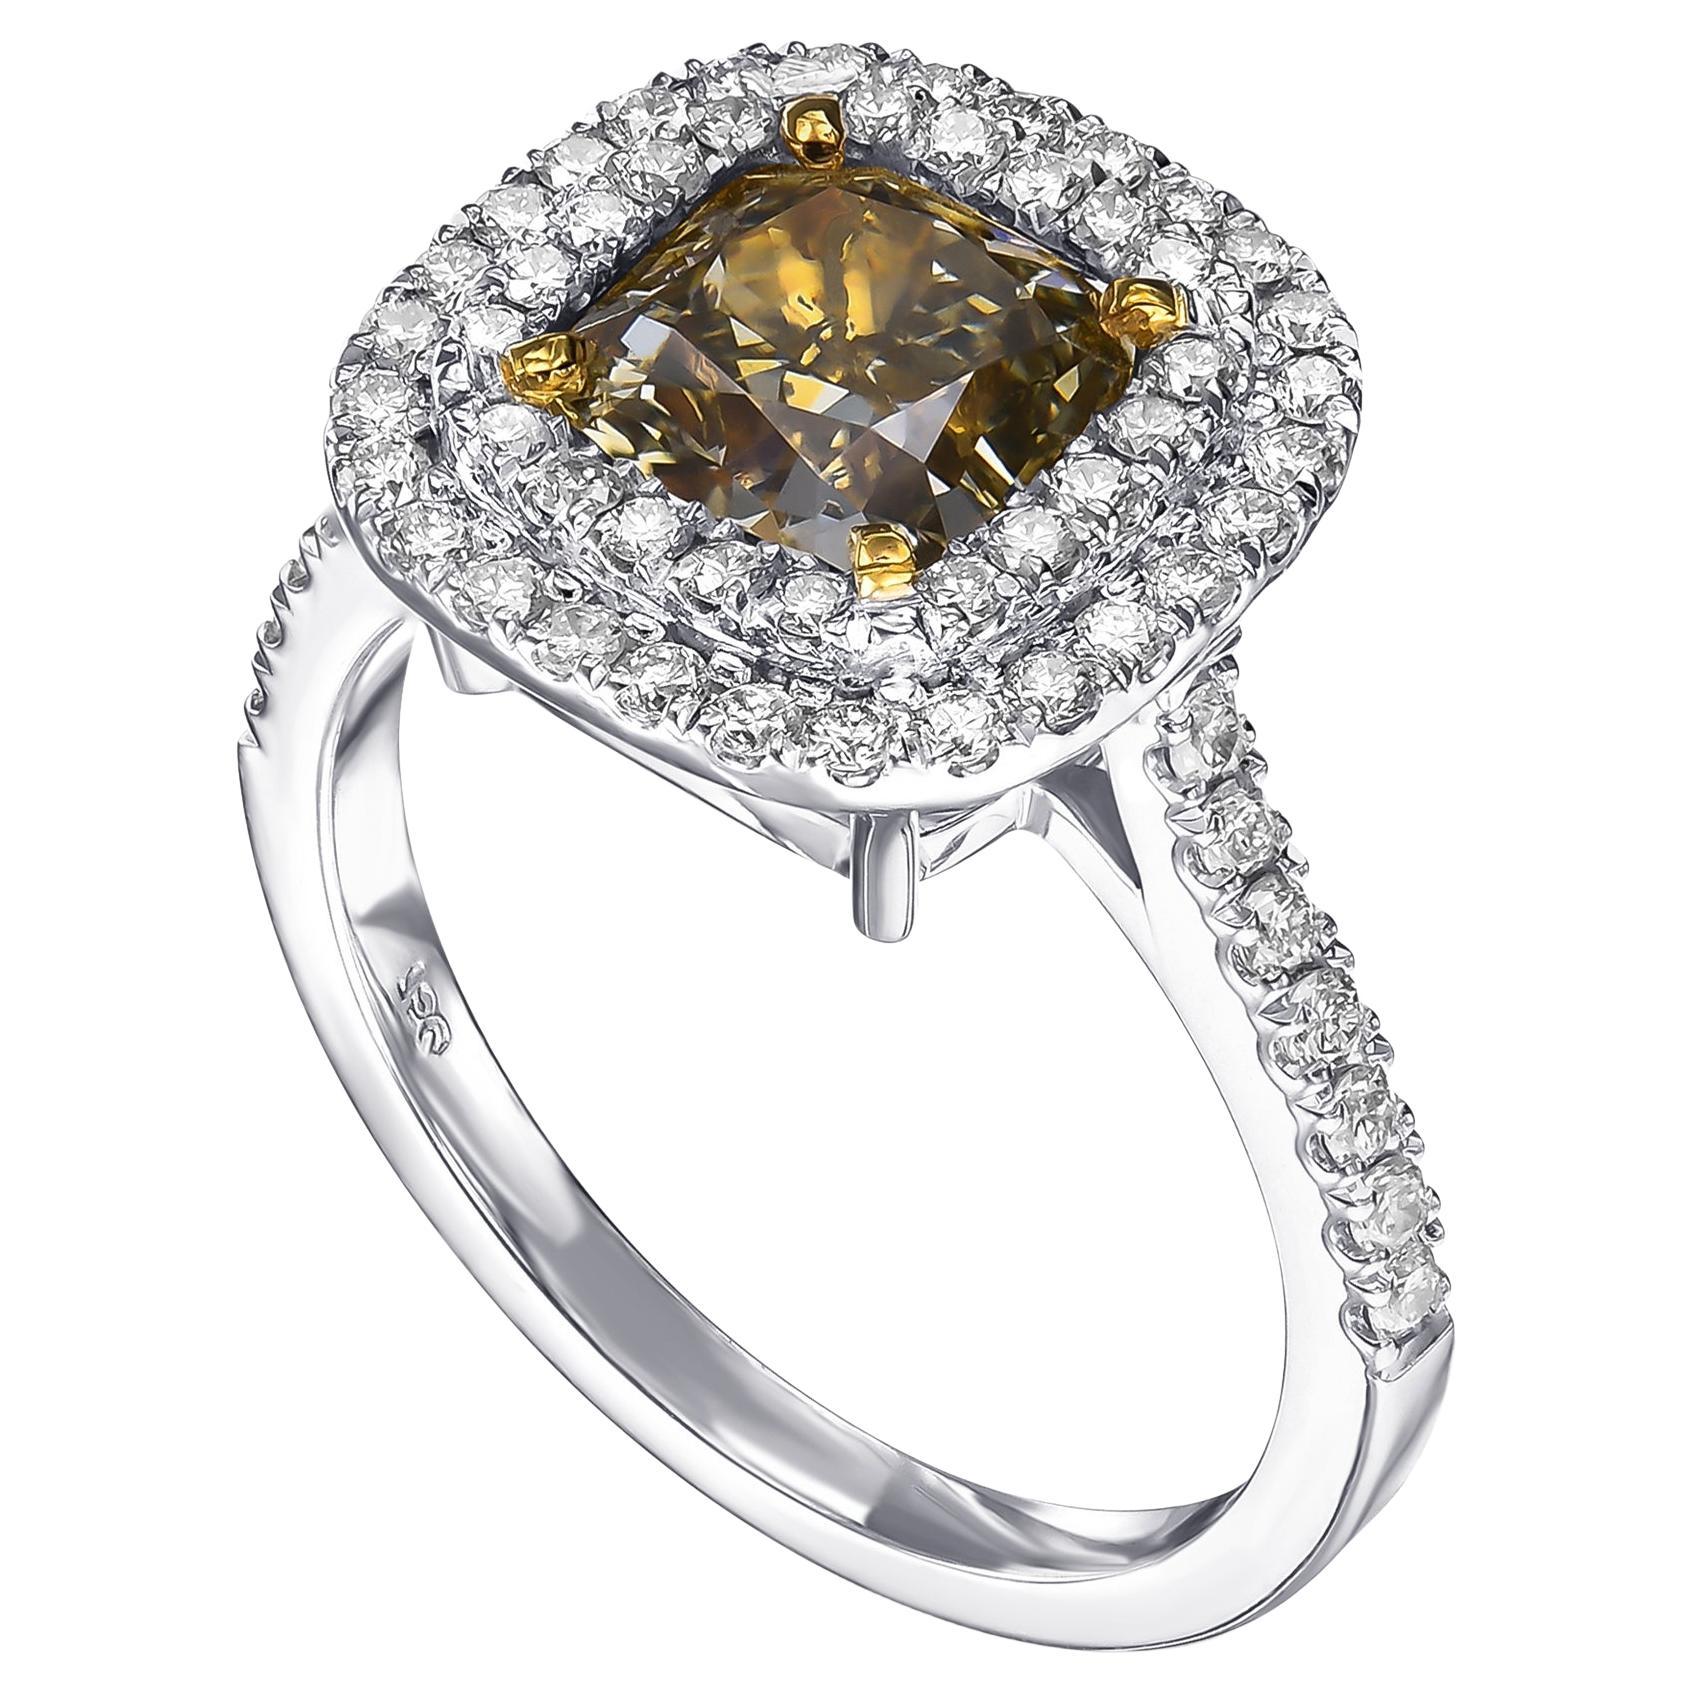 Today we are offering this amazing ring featuring a center 2.01 carat fancy brown-greenish yellow diamond diamonds halo ring. 

A once in a lifetime opportunity to become the proud owner of this amazing ring. The ring has tremendous brilliance and